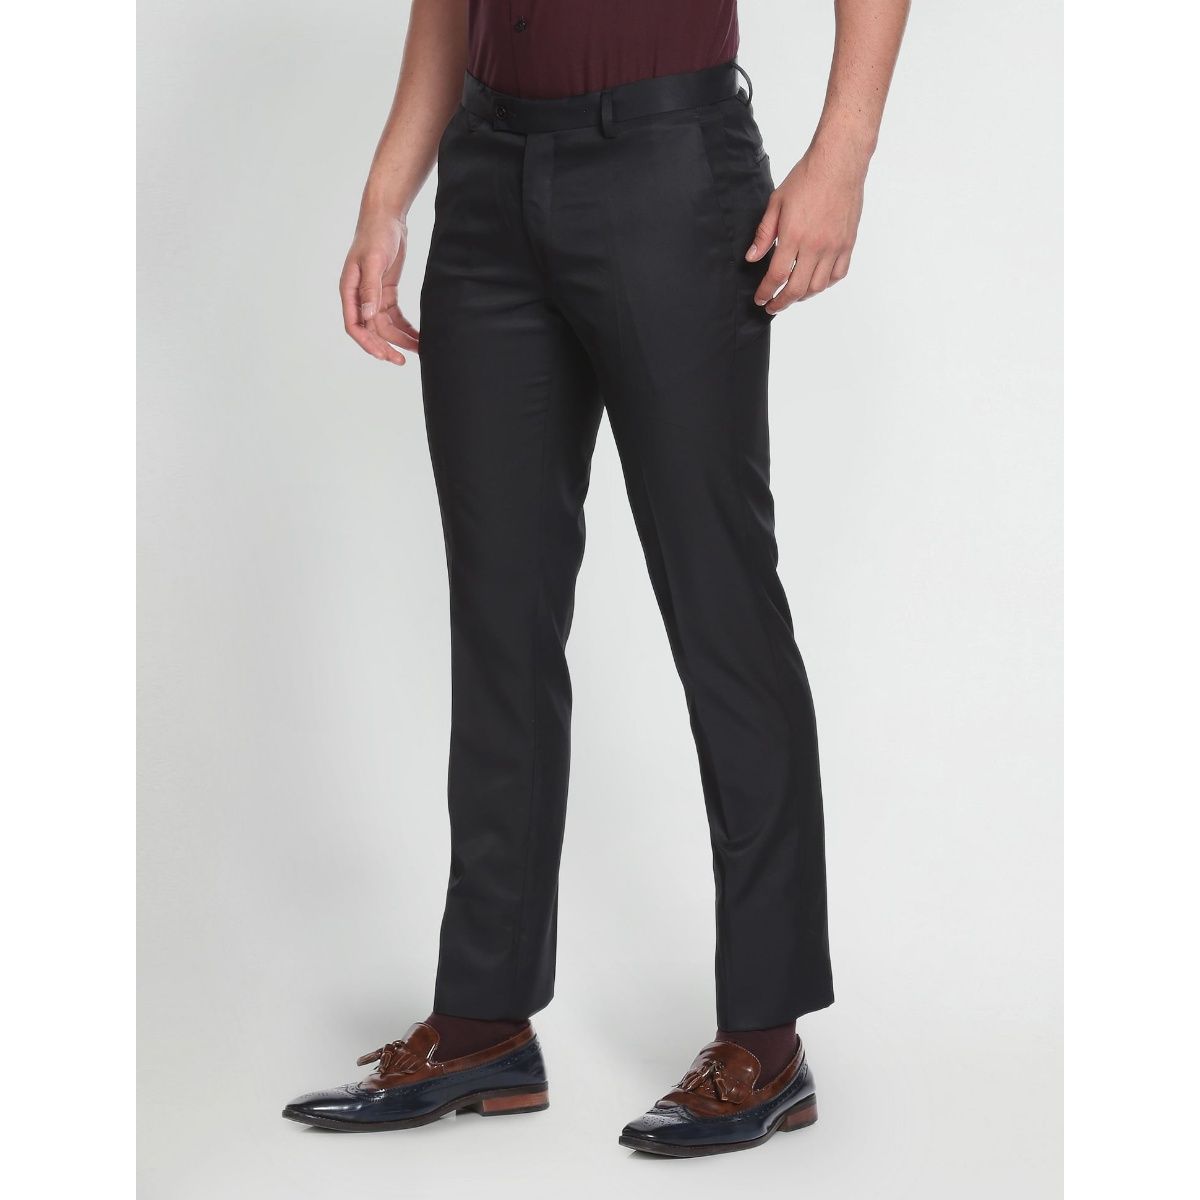 Buy ARROW Mens Slim Fit Solid Formal Trousers | Shoppers Stop